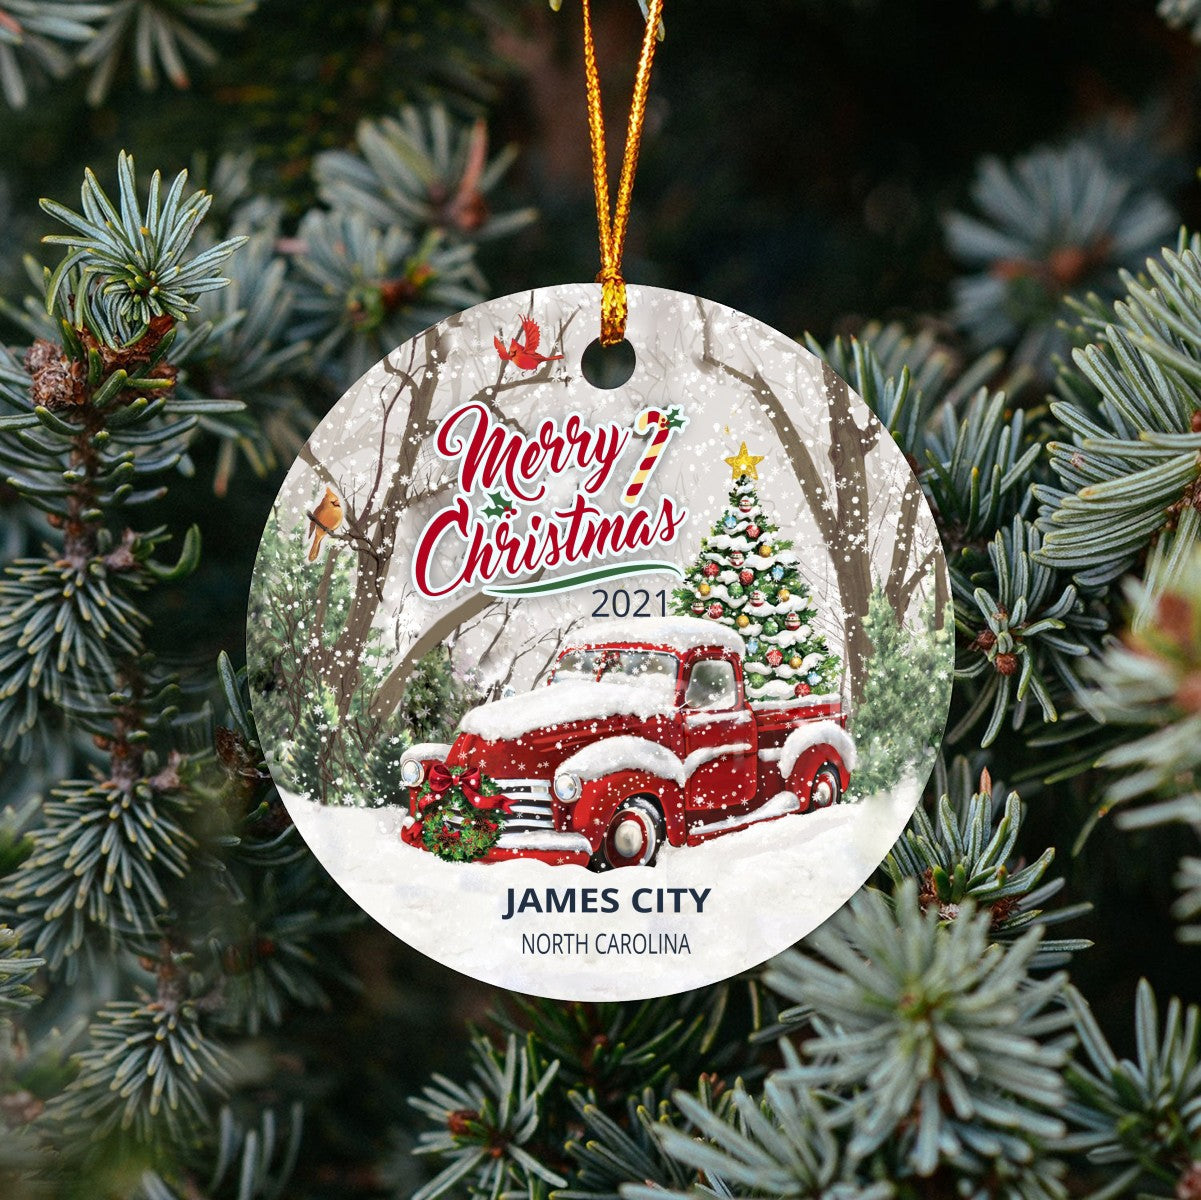 Christmas Tree Ornaments James City - Ornament With Name City, State James City North Carolina NC Ornament - Red Truck Xmas Ornaments 3'' Plastic Gift For Family, Friend And Housewarming